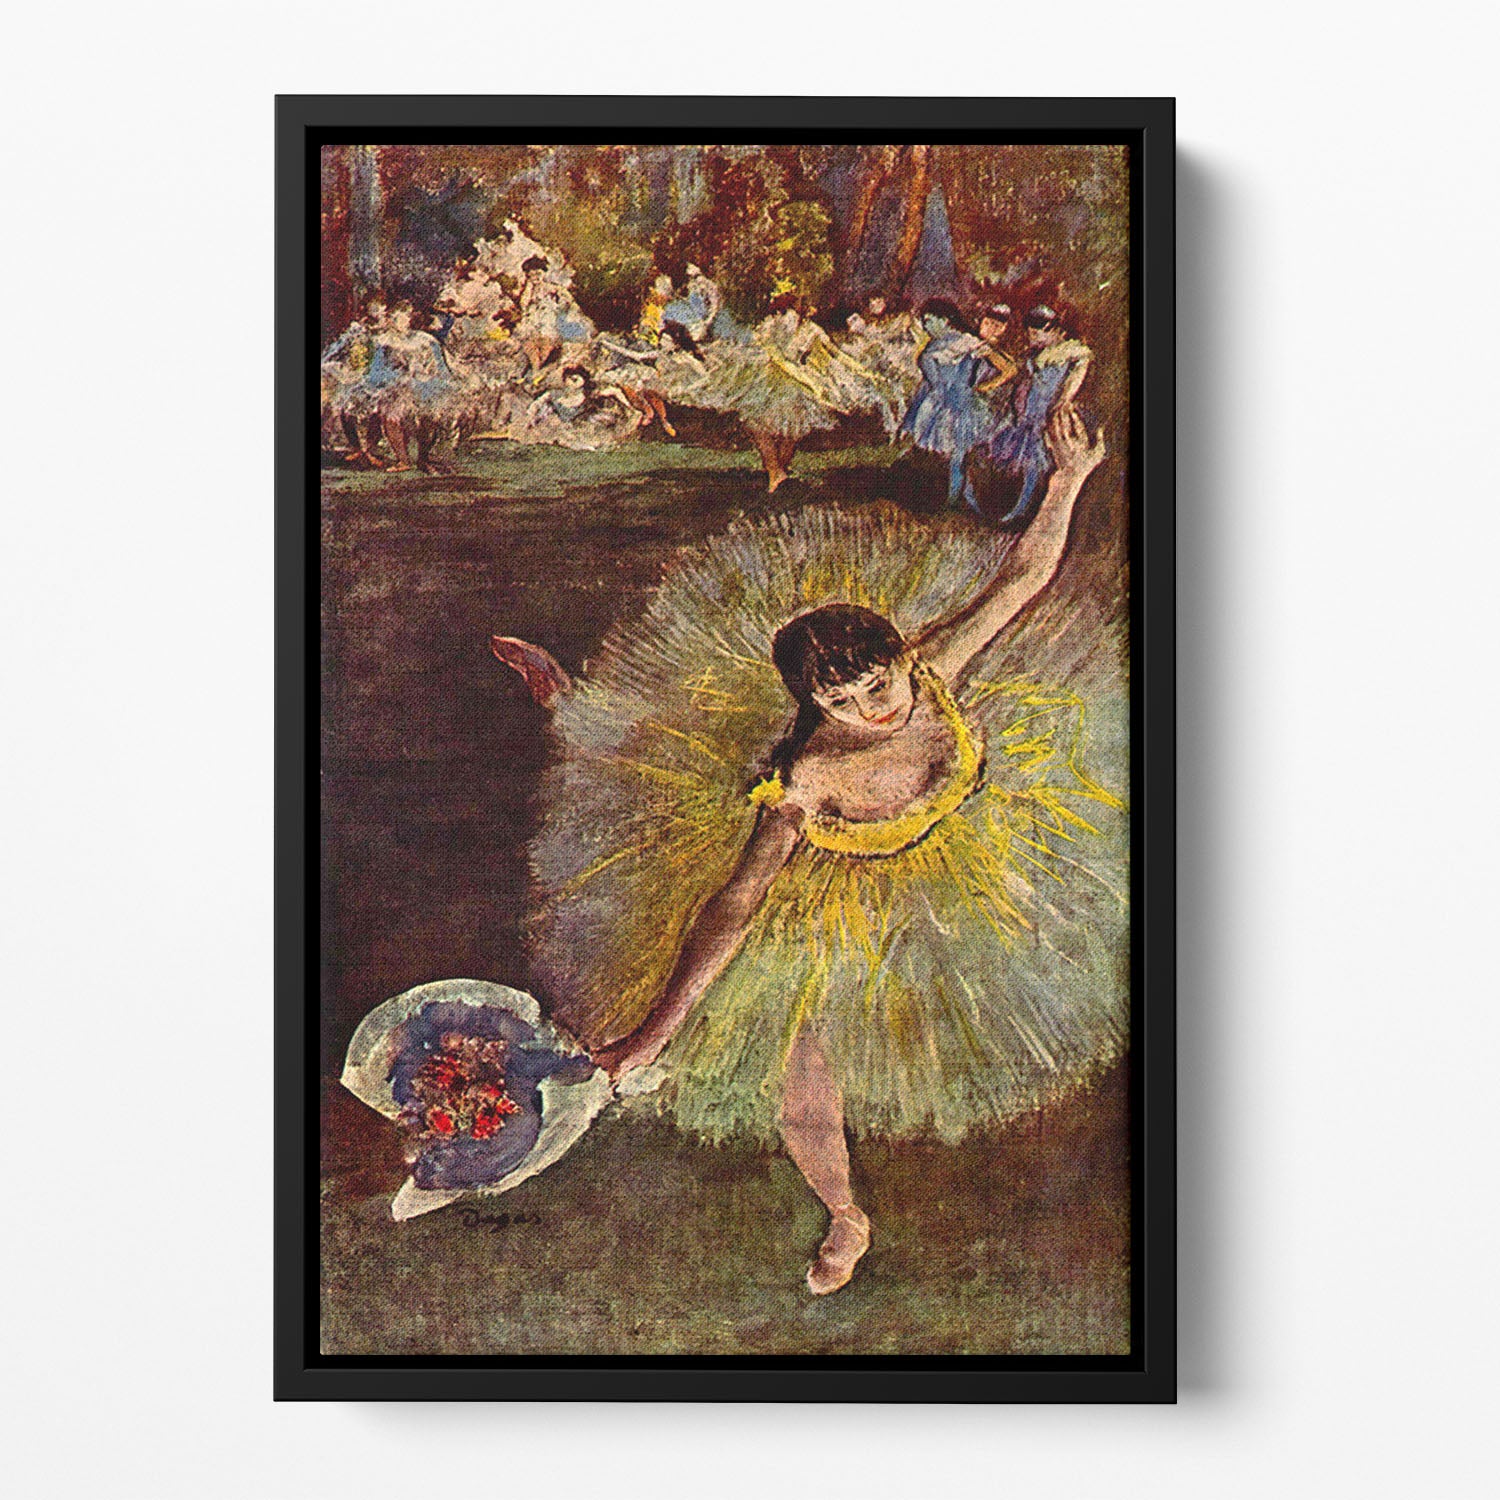 End of the arabesque by Degas Floating Framed Canvas